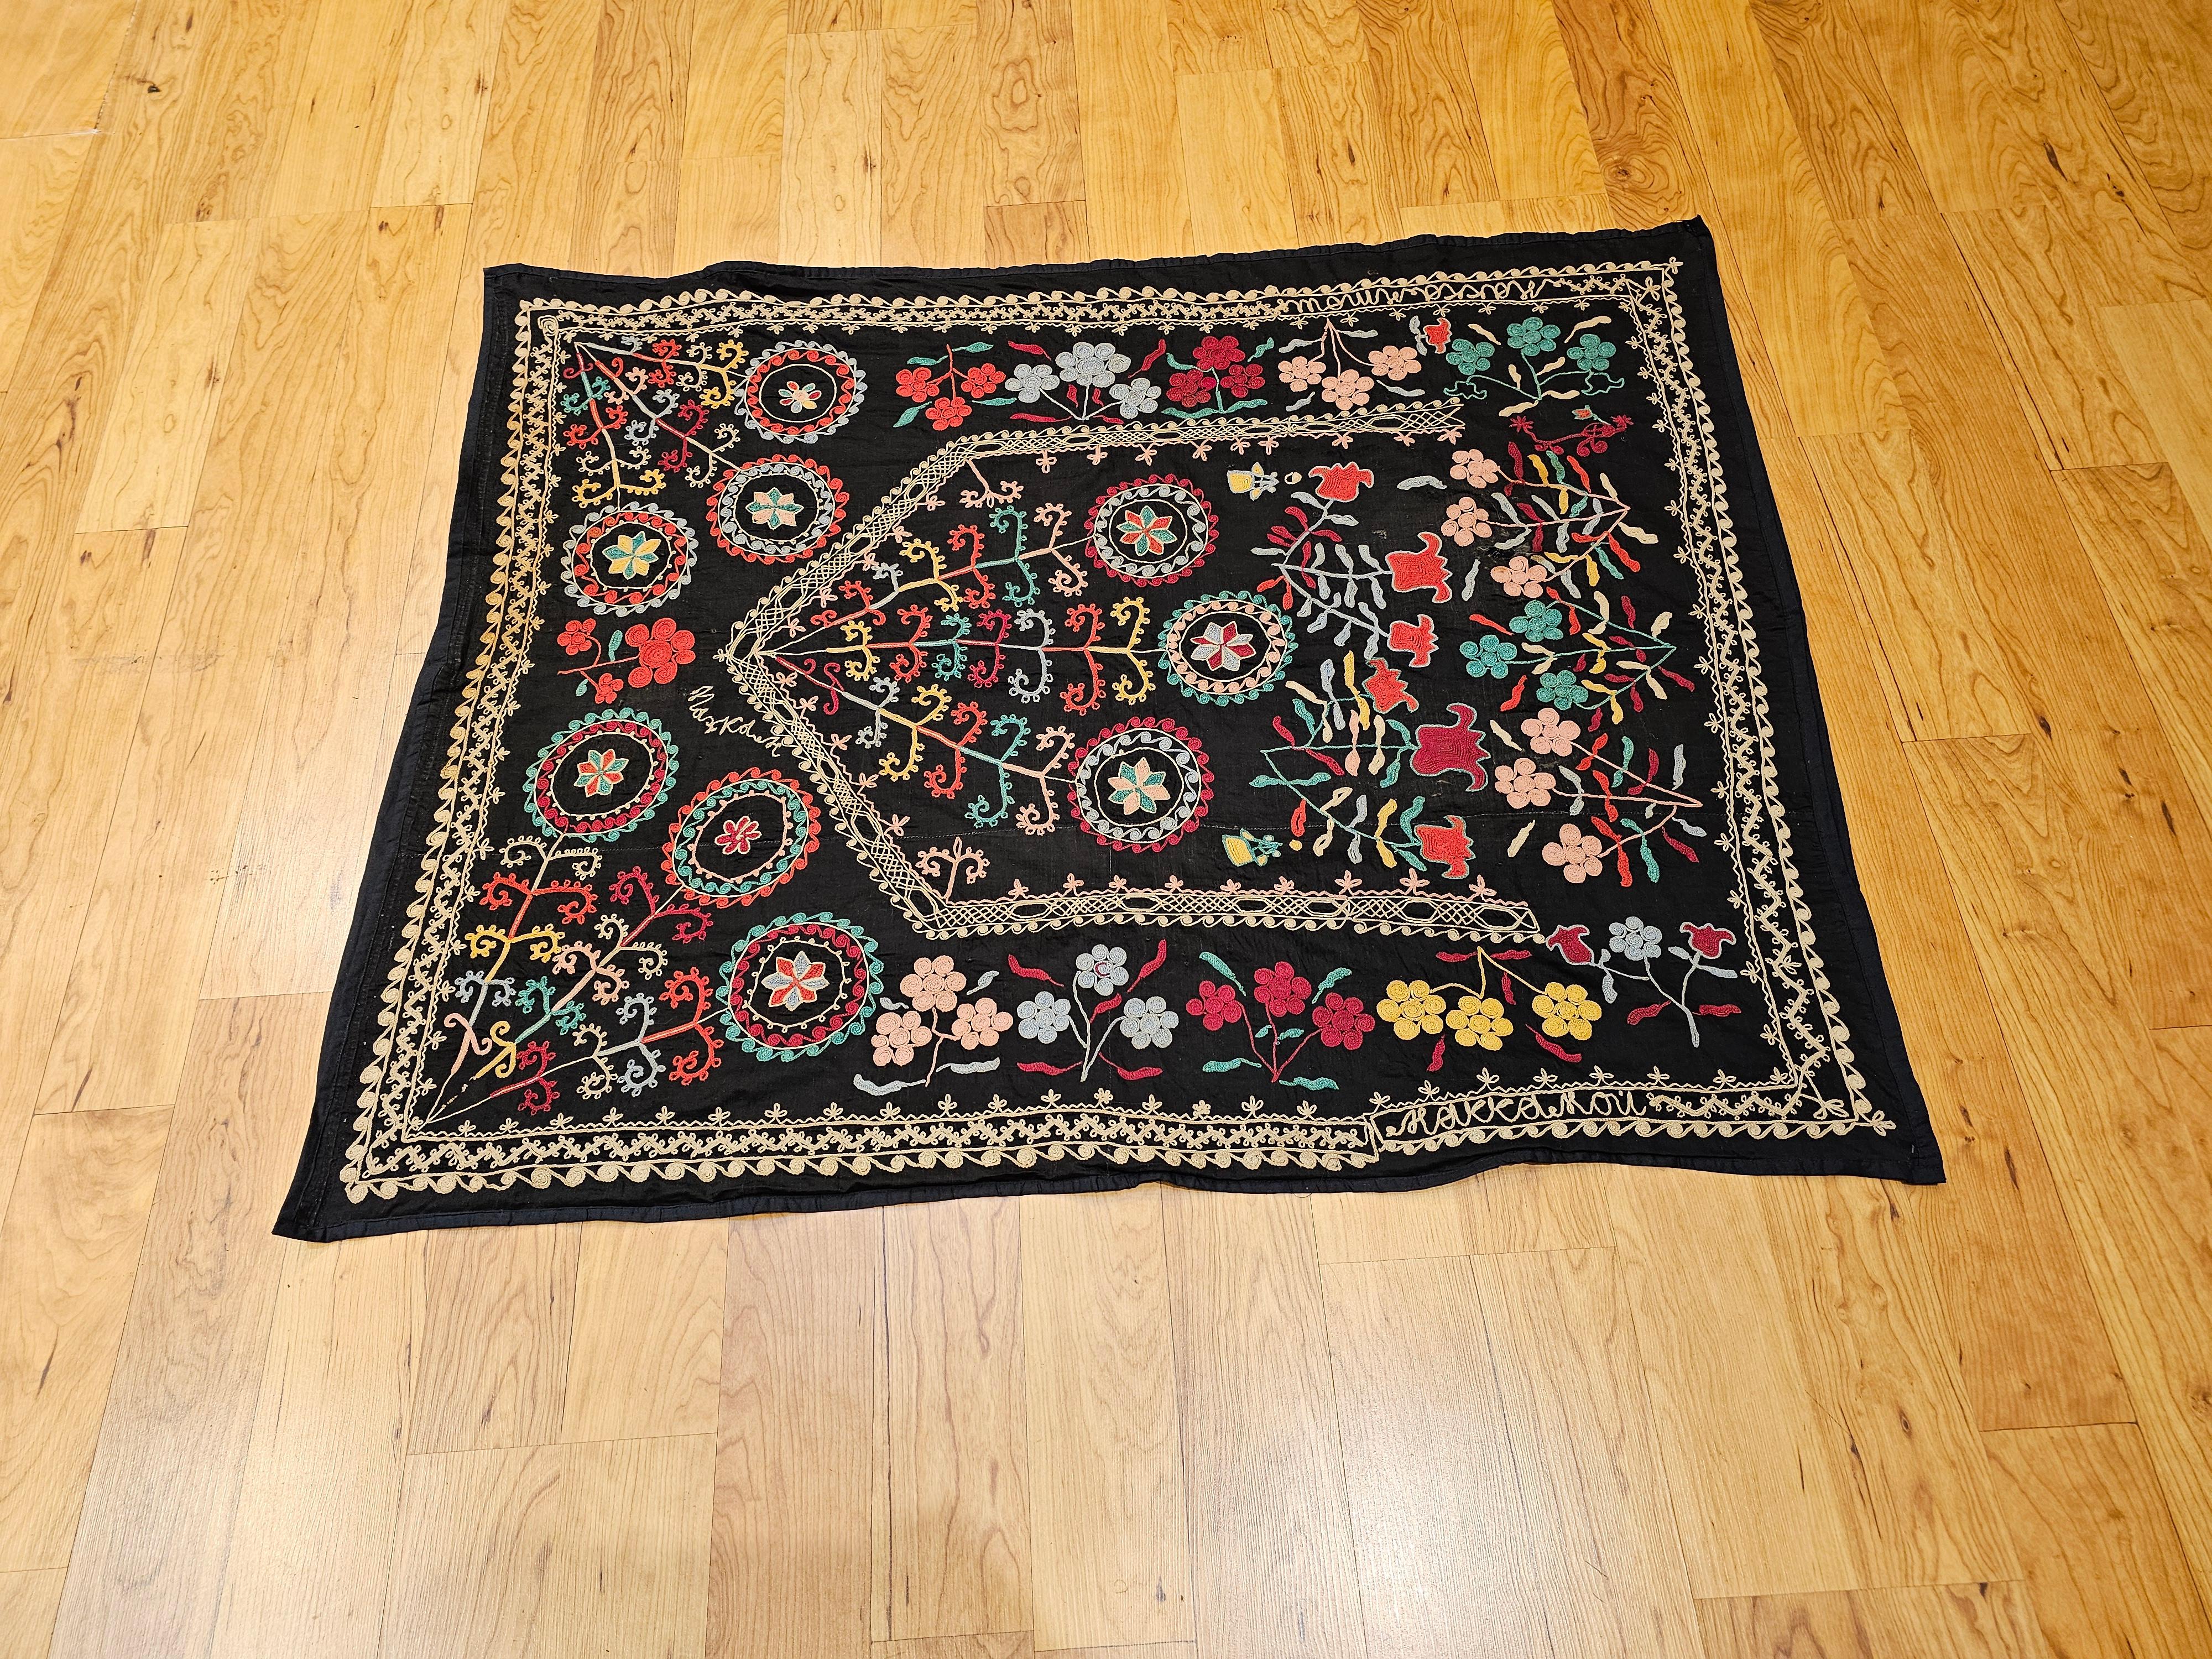 Vintage Hand Embroidered Uzbek Silk Suzani in Black, Red, Green, Yellow Wall Art For Sale 9